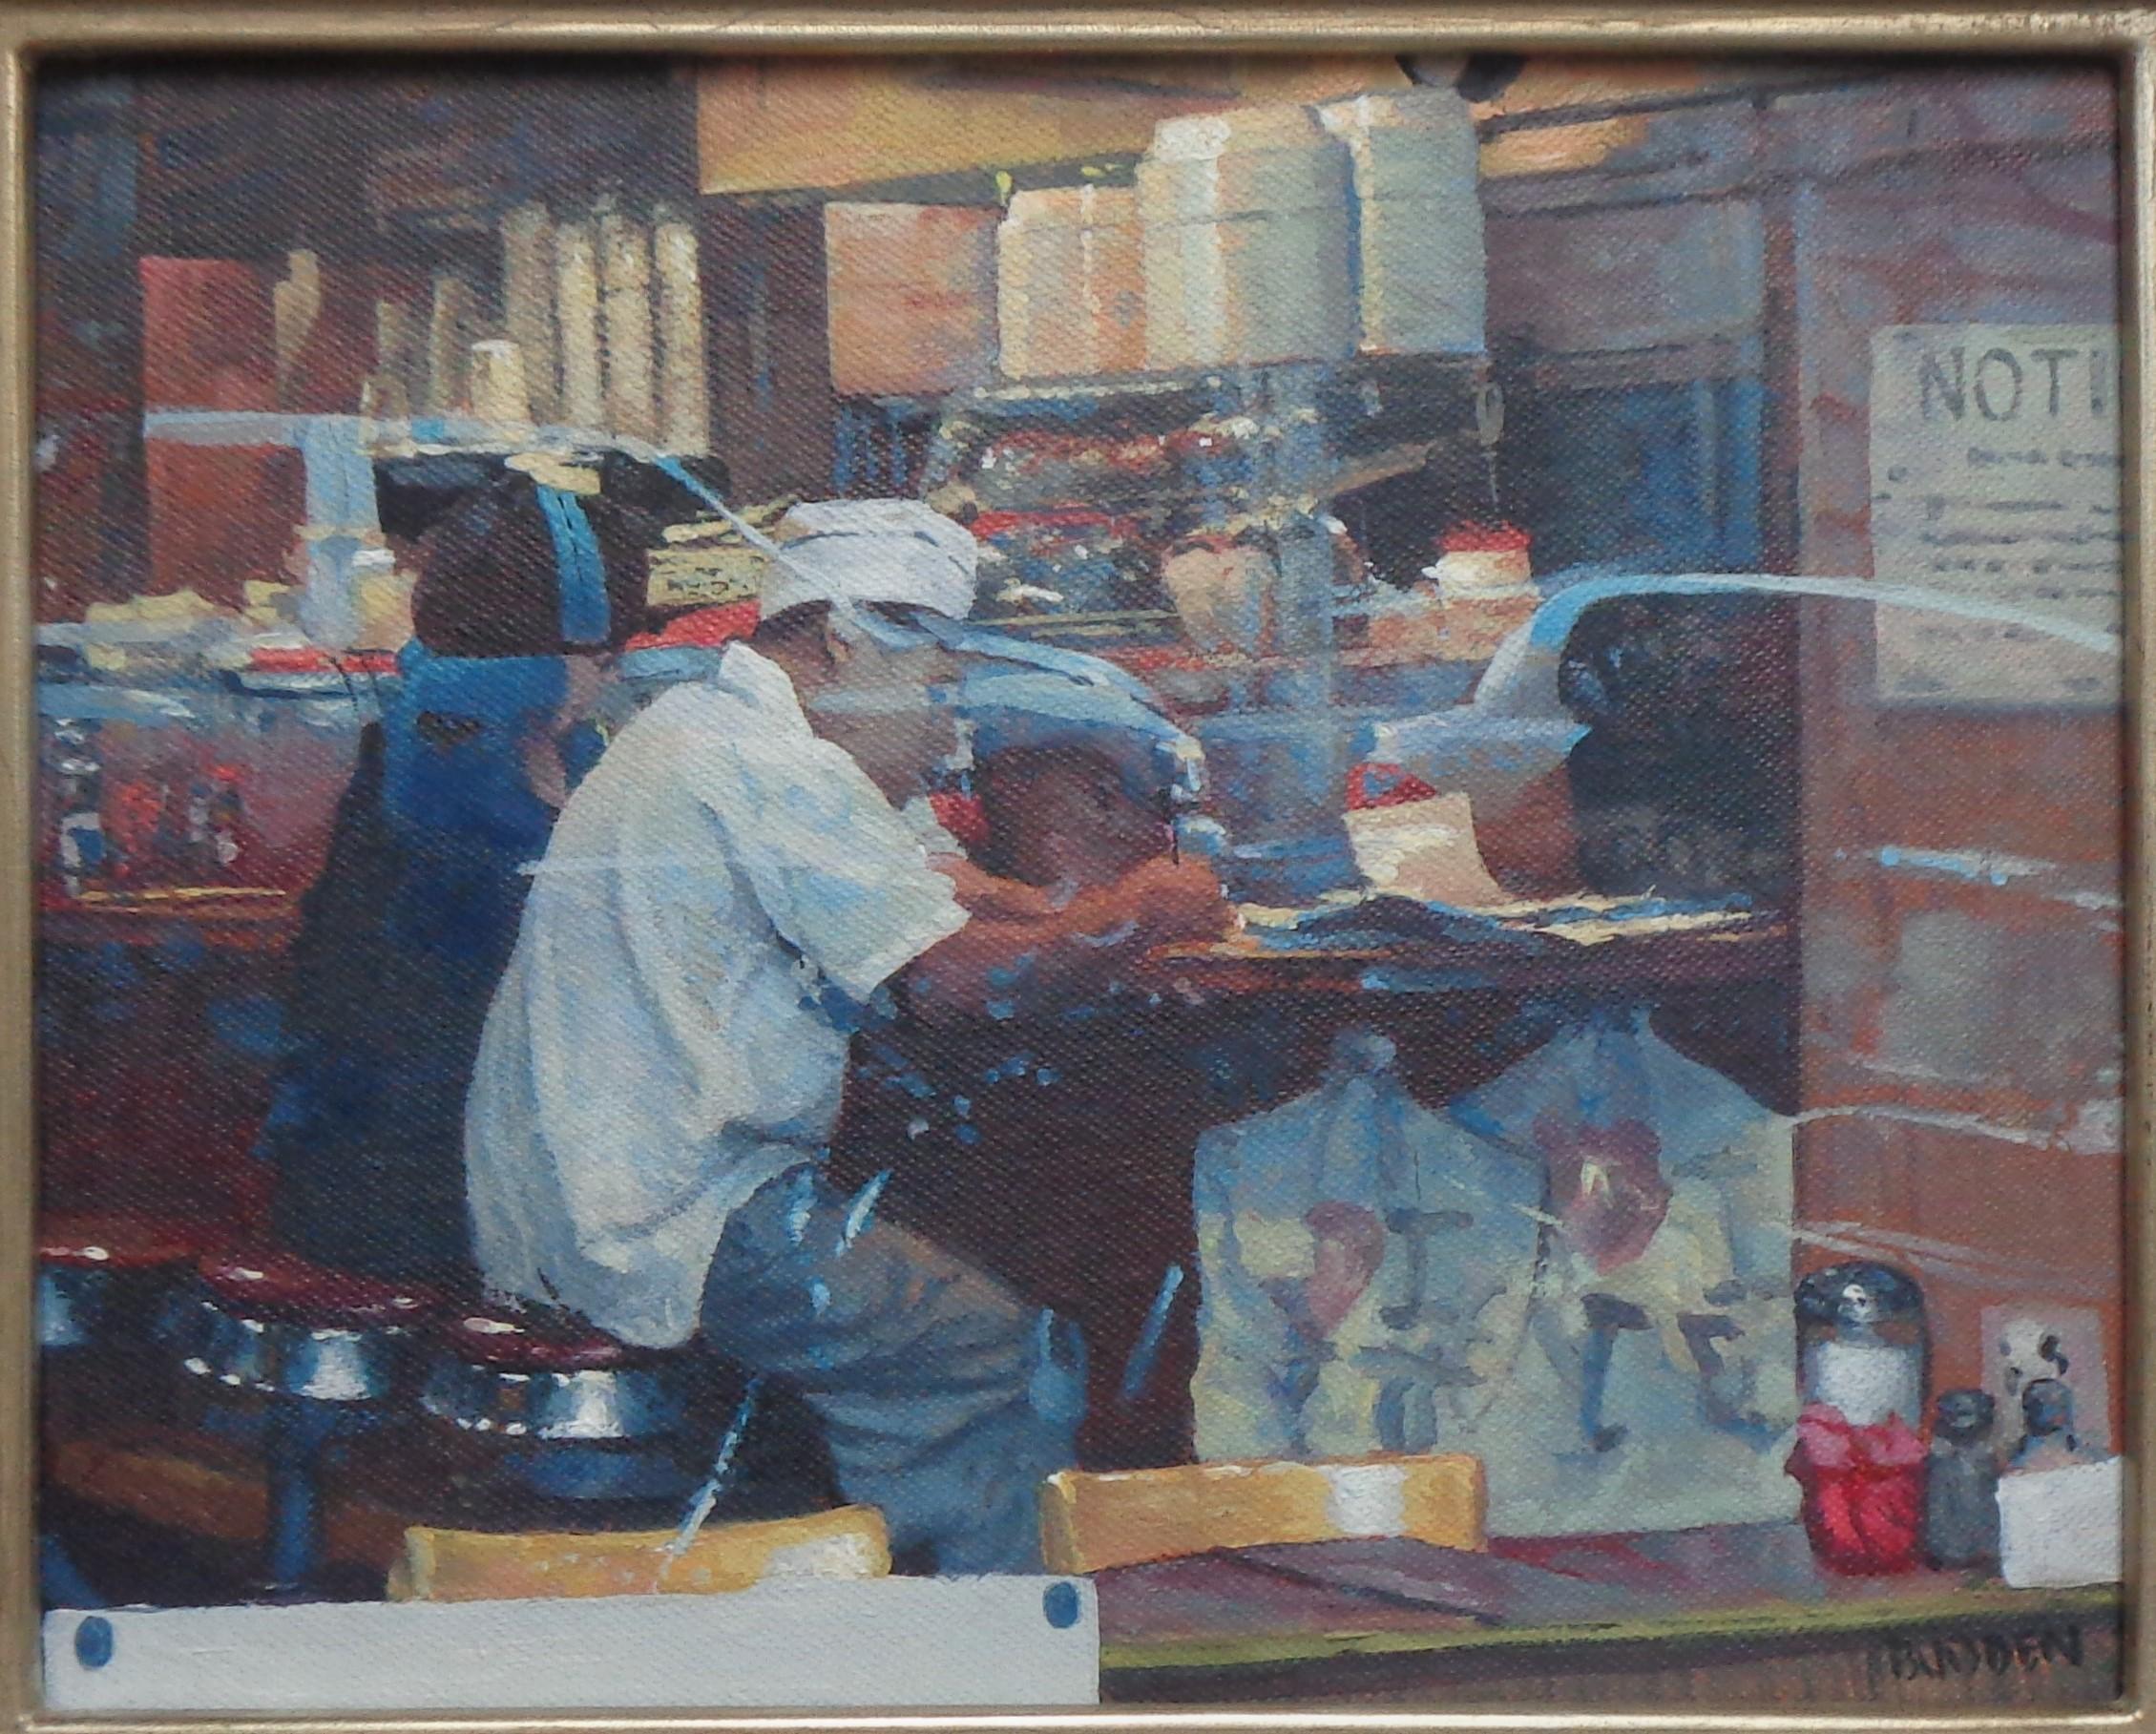 Transparency & Reflection, A NYC Diner
oil/panel
8 x 10 unframed, 14.5 x 16.5 framed, is a realistic oil painting by award winning contemporary artist Michael Budden that showcases  multiple levels of imagery. Dealing with both reflections and